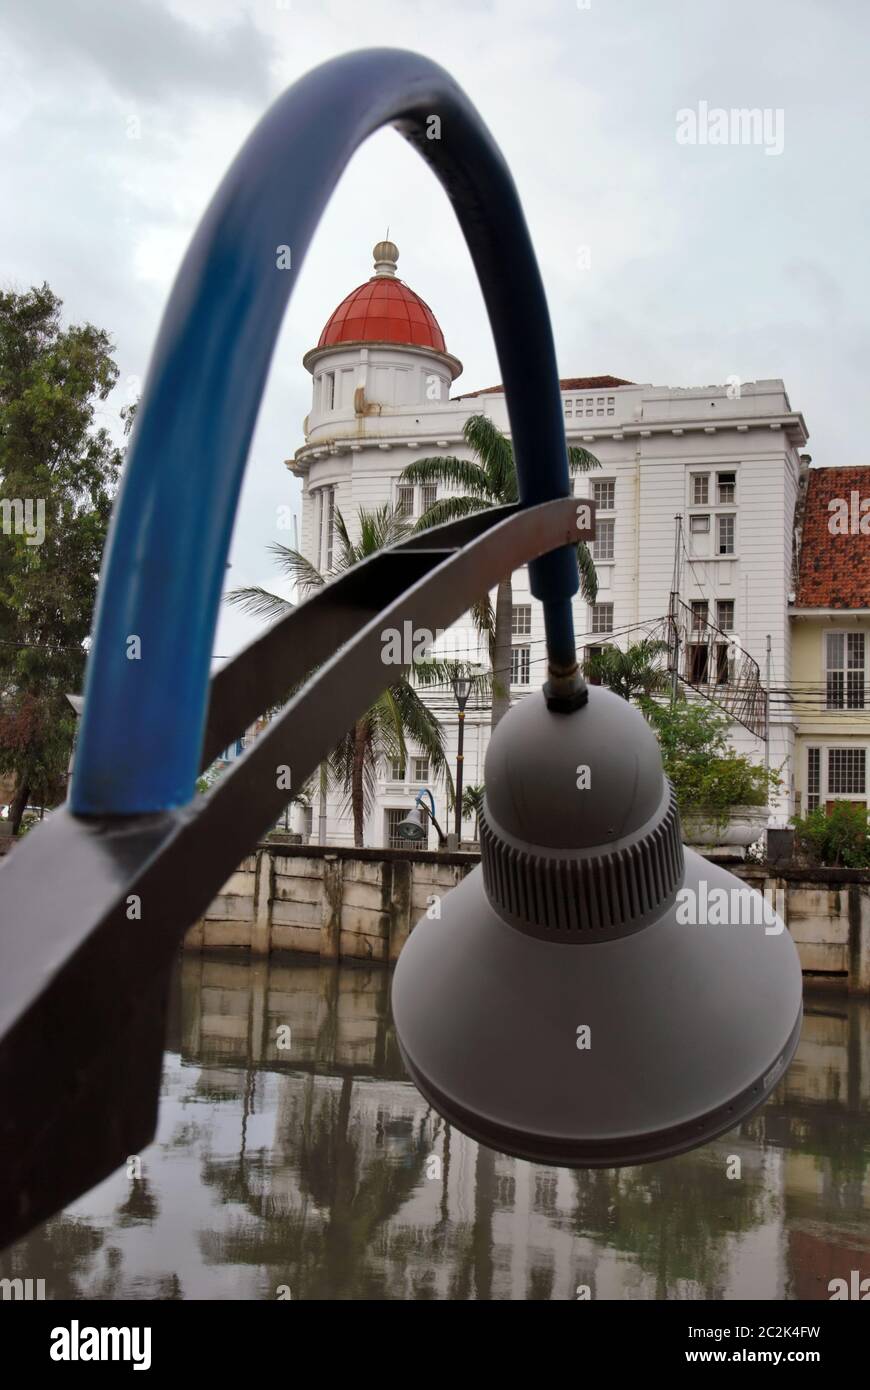 A building with old architectural style seen through streetlight installation on the side of canal in Jakarta Old Town area. Jakarta, Indonesia. Stock Photo